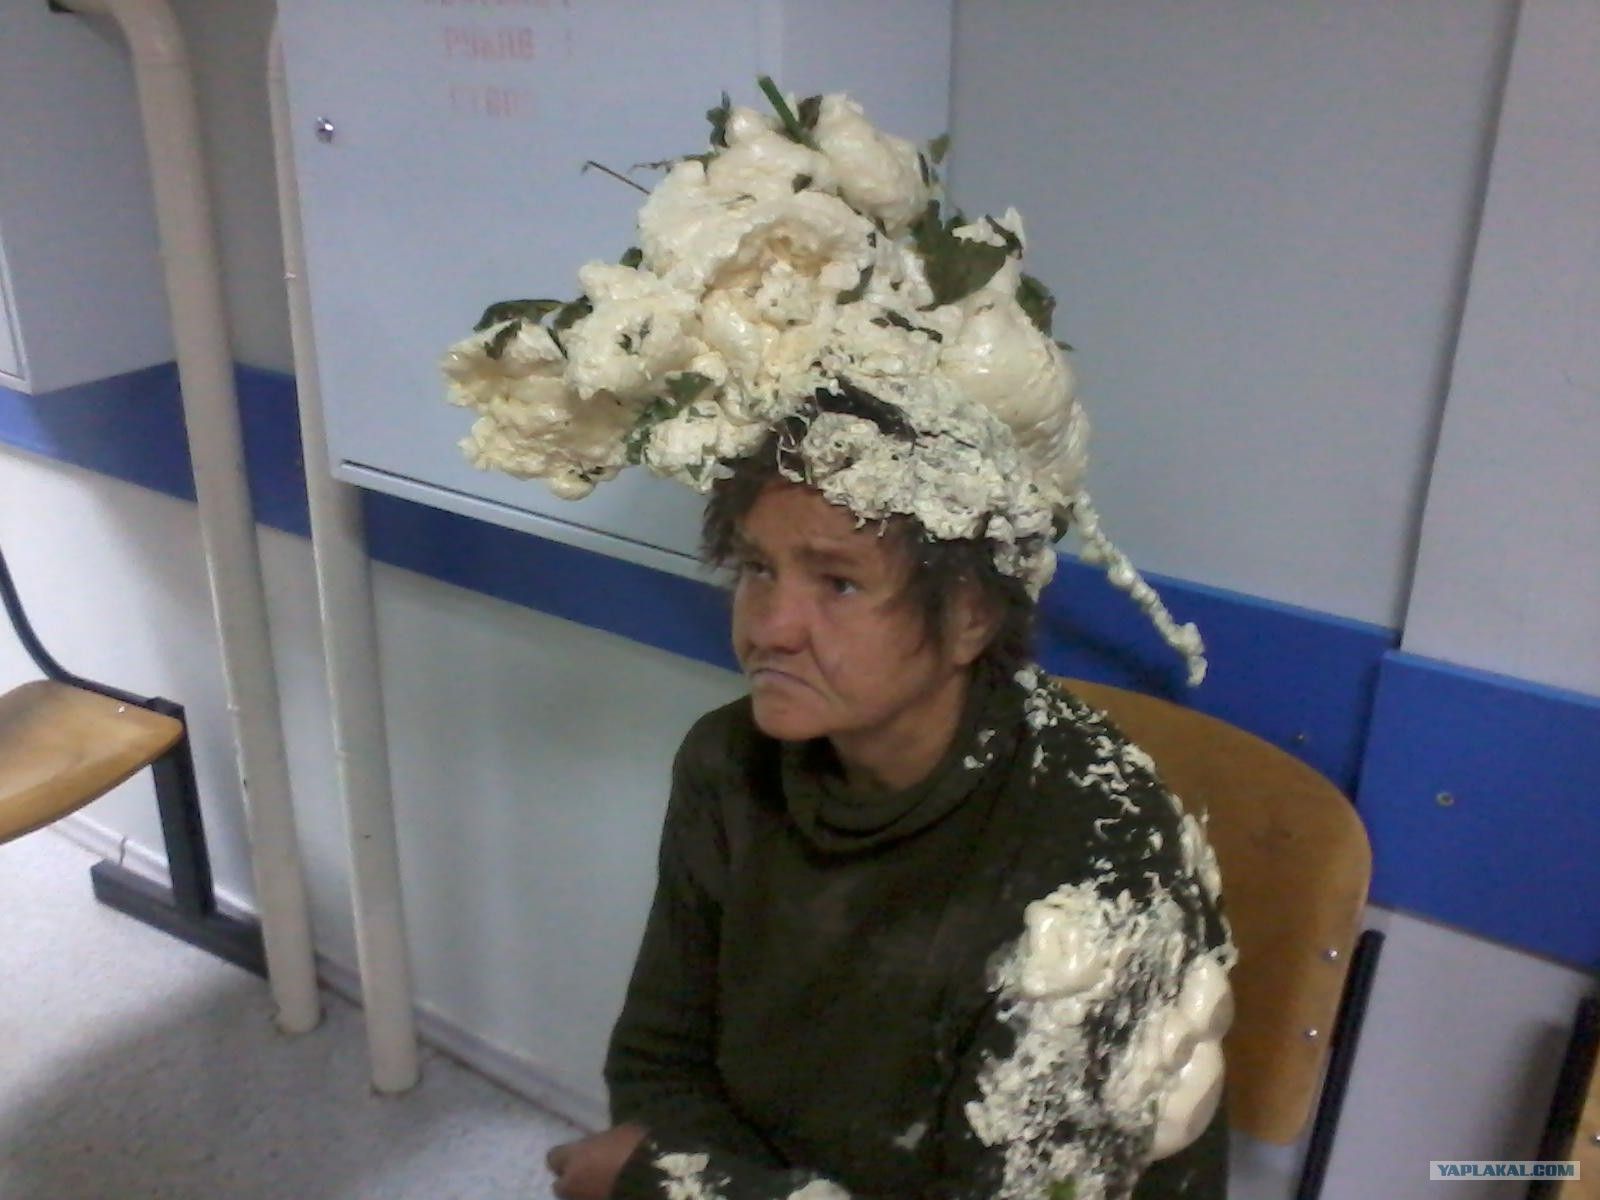 Woman ends up in hospital after mistaking builders expanding foam for hair mousse.